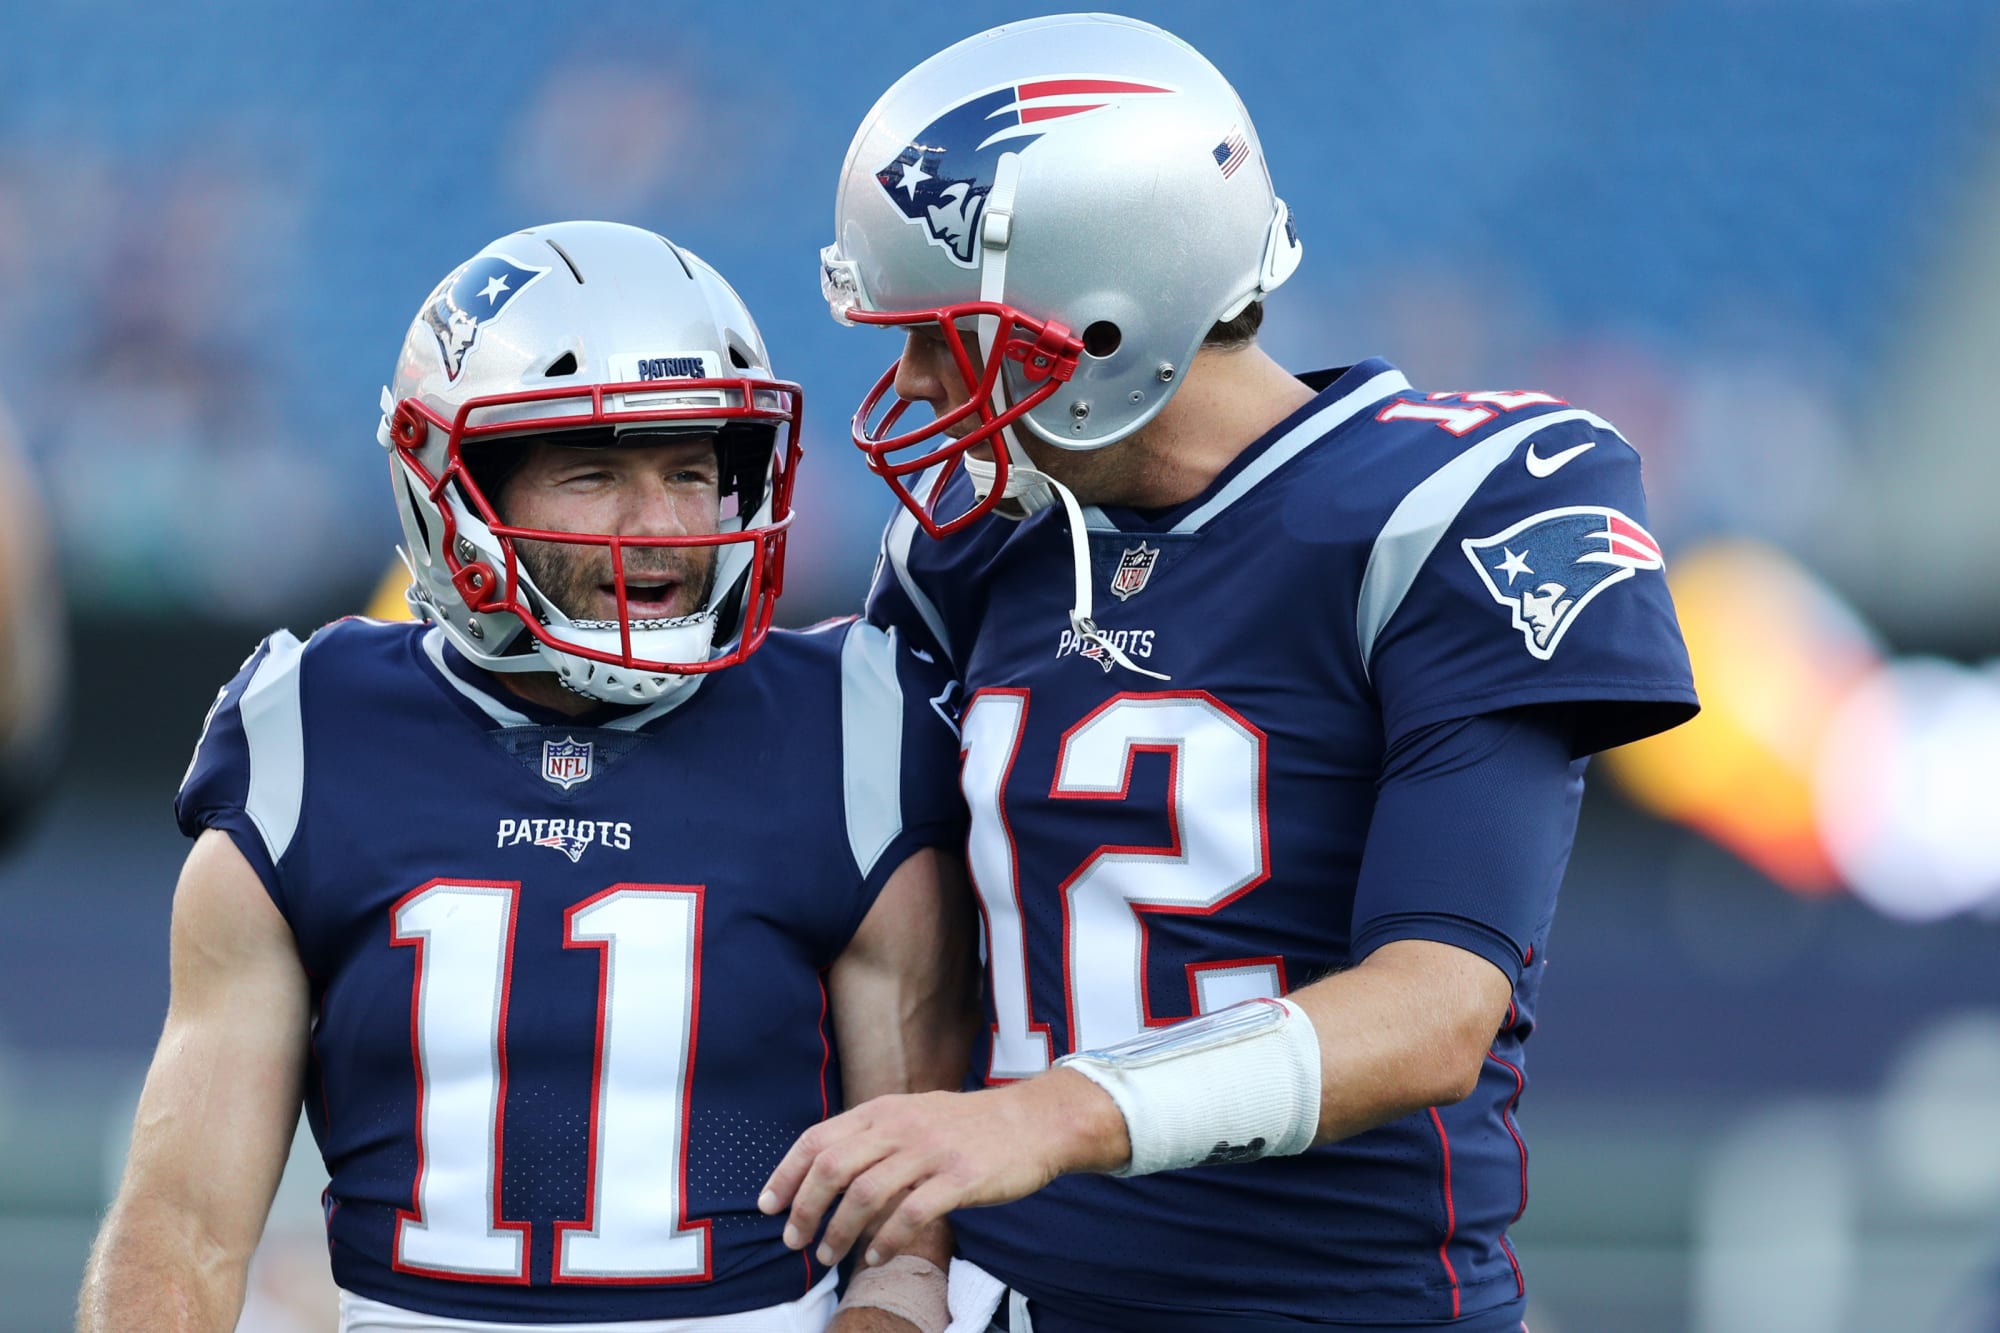 Tom Brady throwing to ‘former Patriots receivers’ is a gut punch